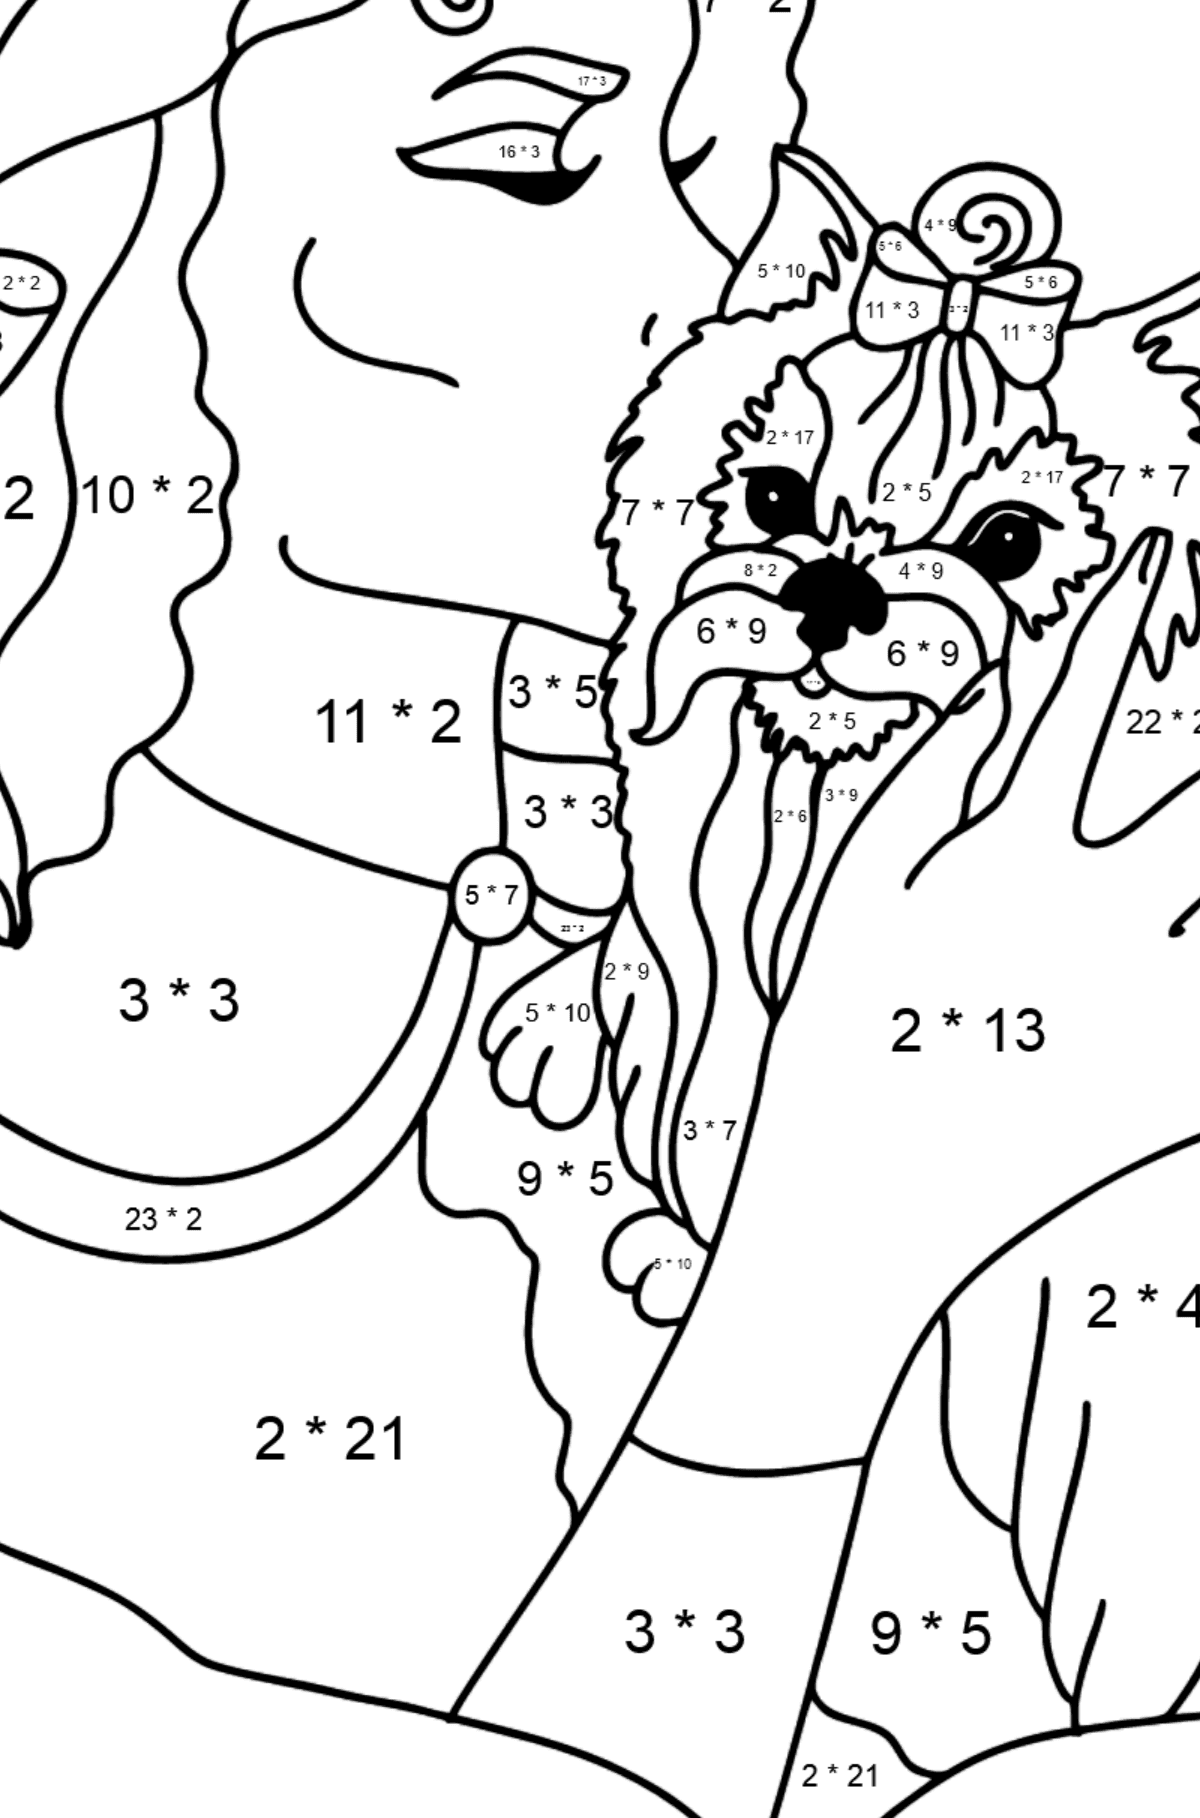 Yorkshire Terrier with Owner coloring page - Math Coloring - Multiplication for Kids